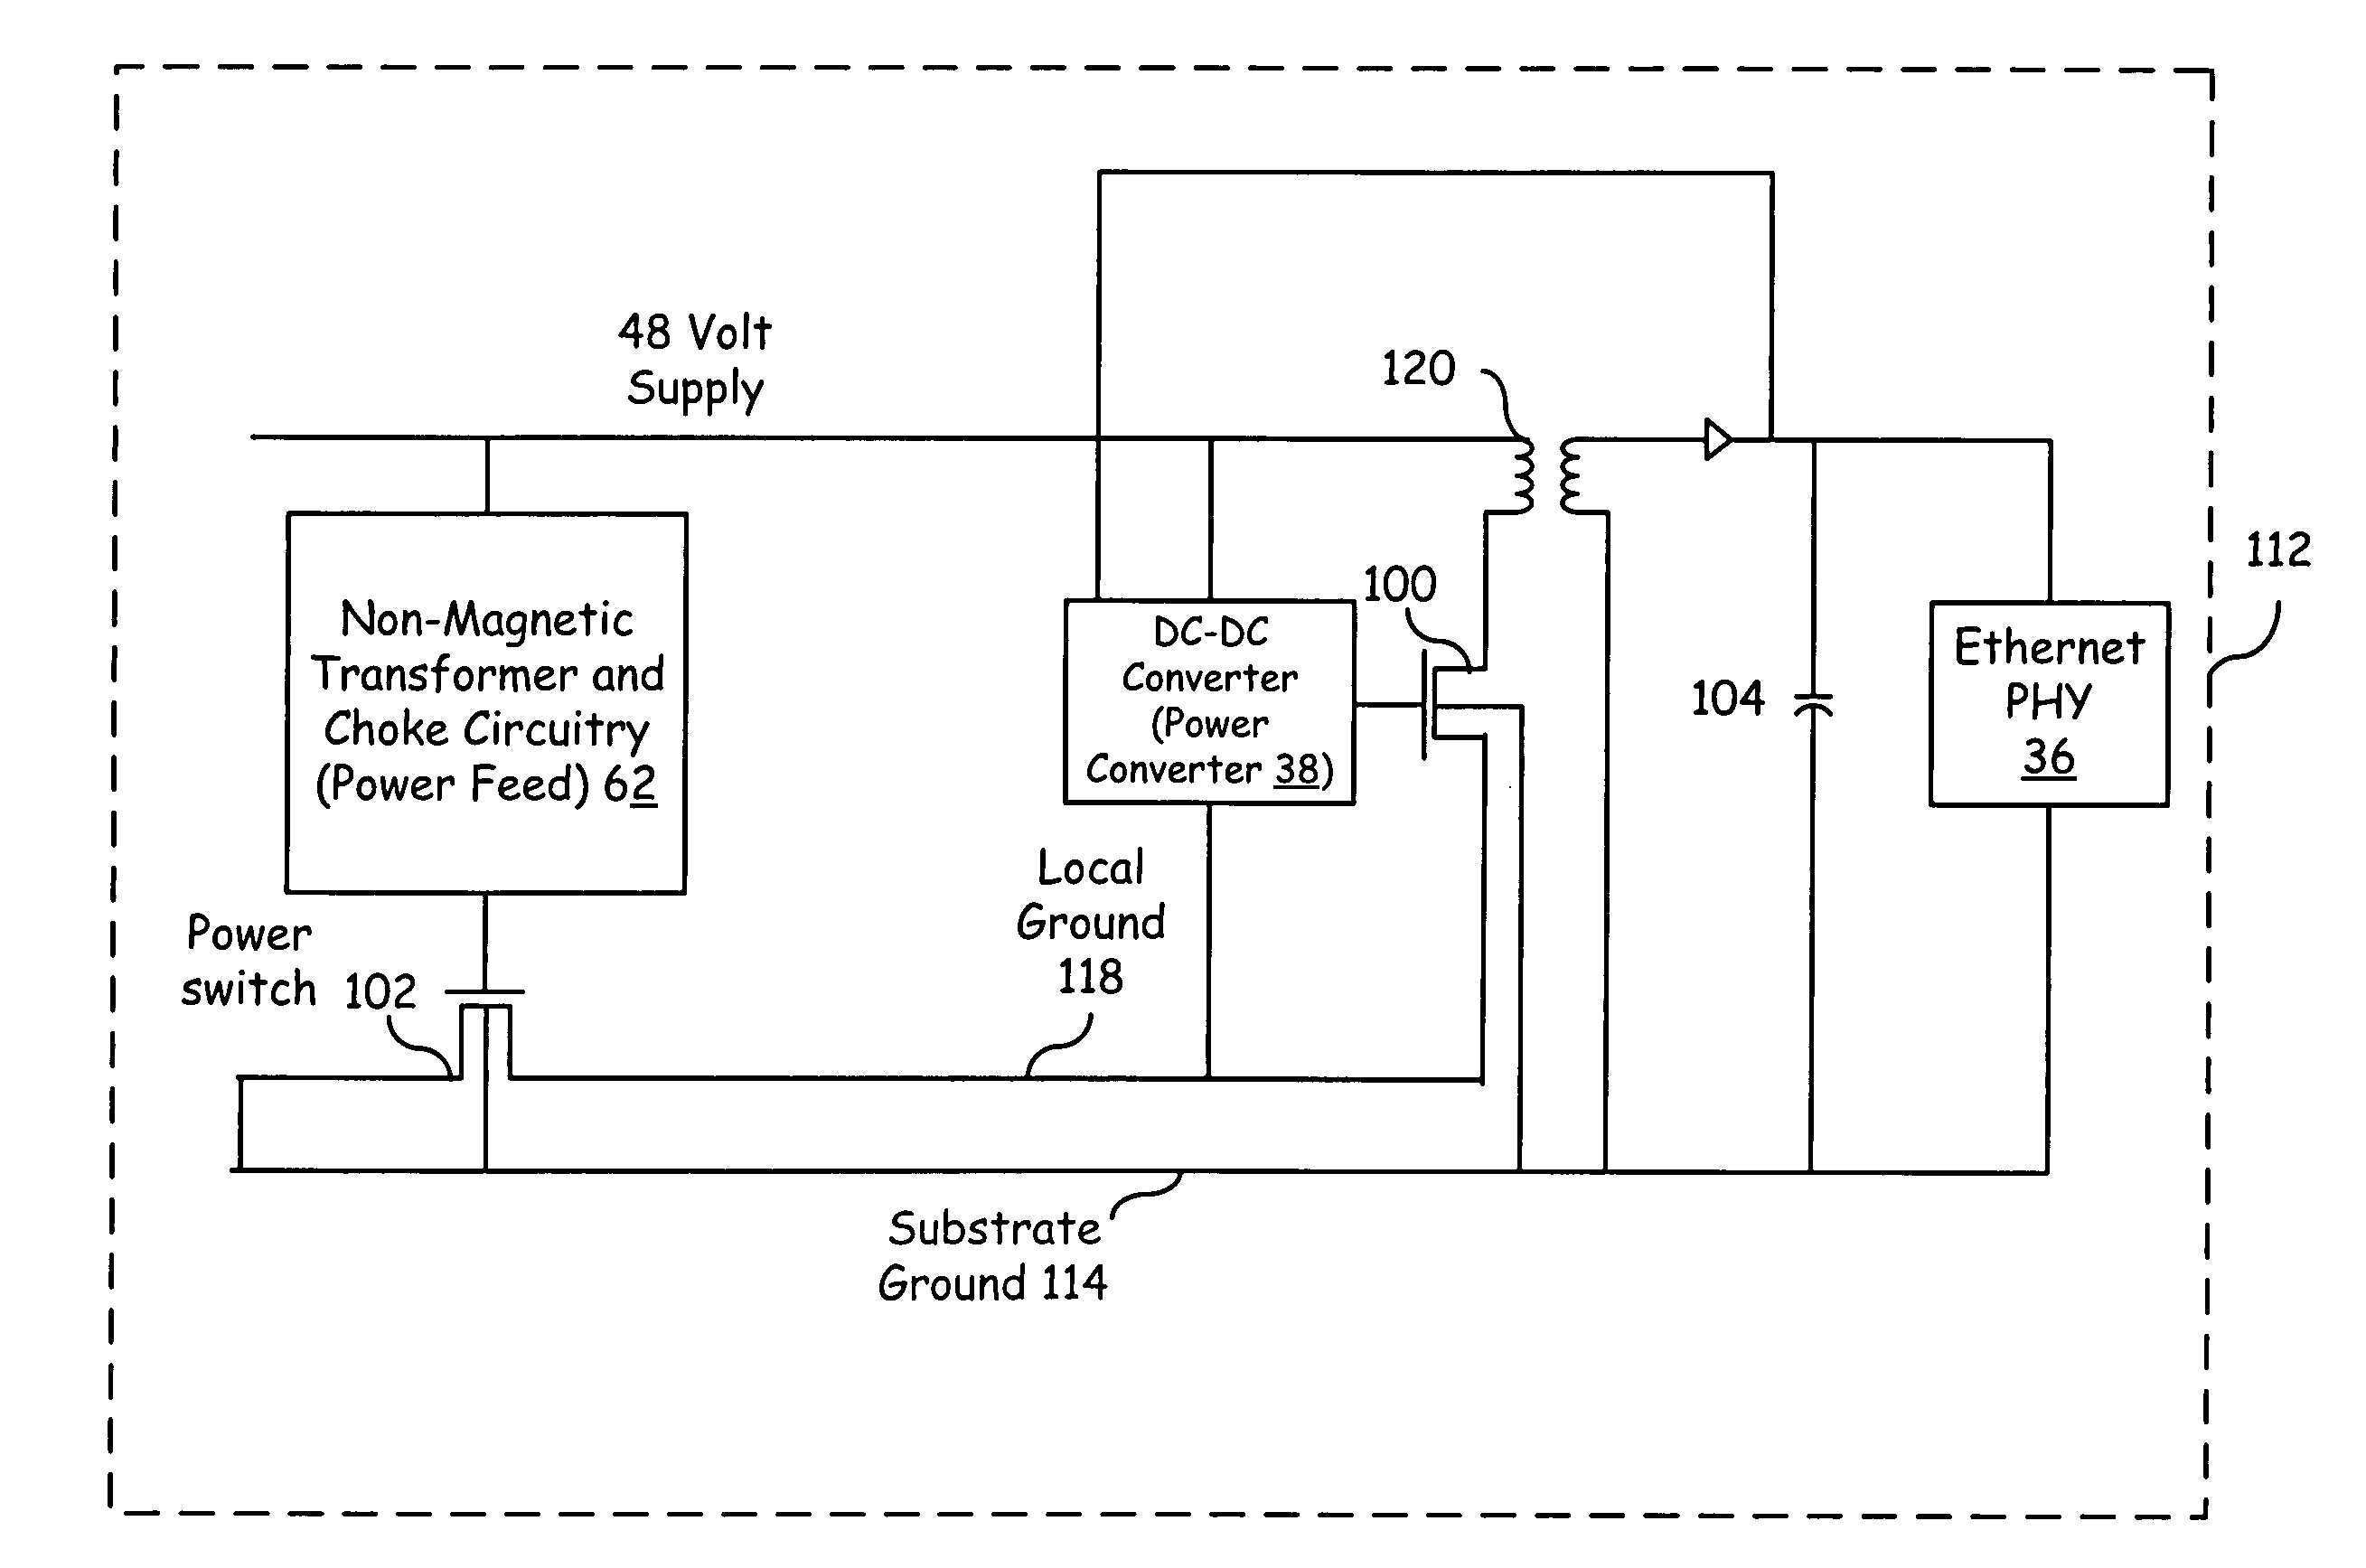 Integrated DC/DC converter substrate connections